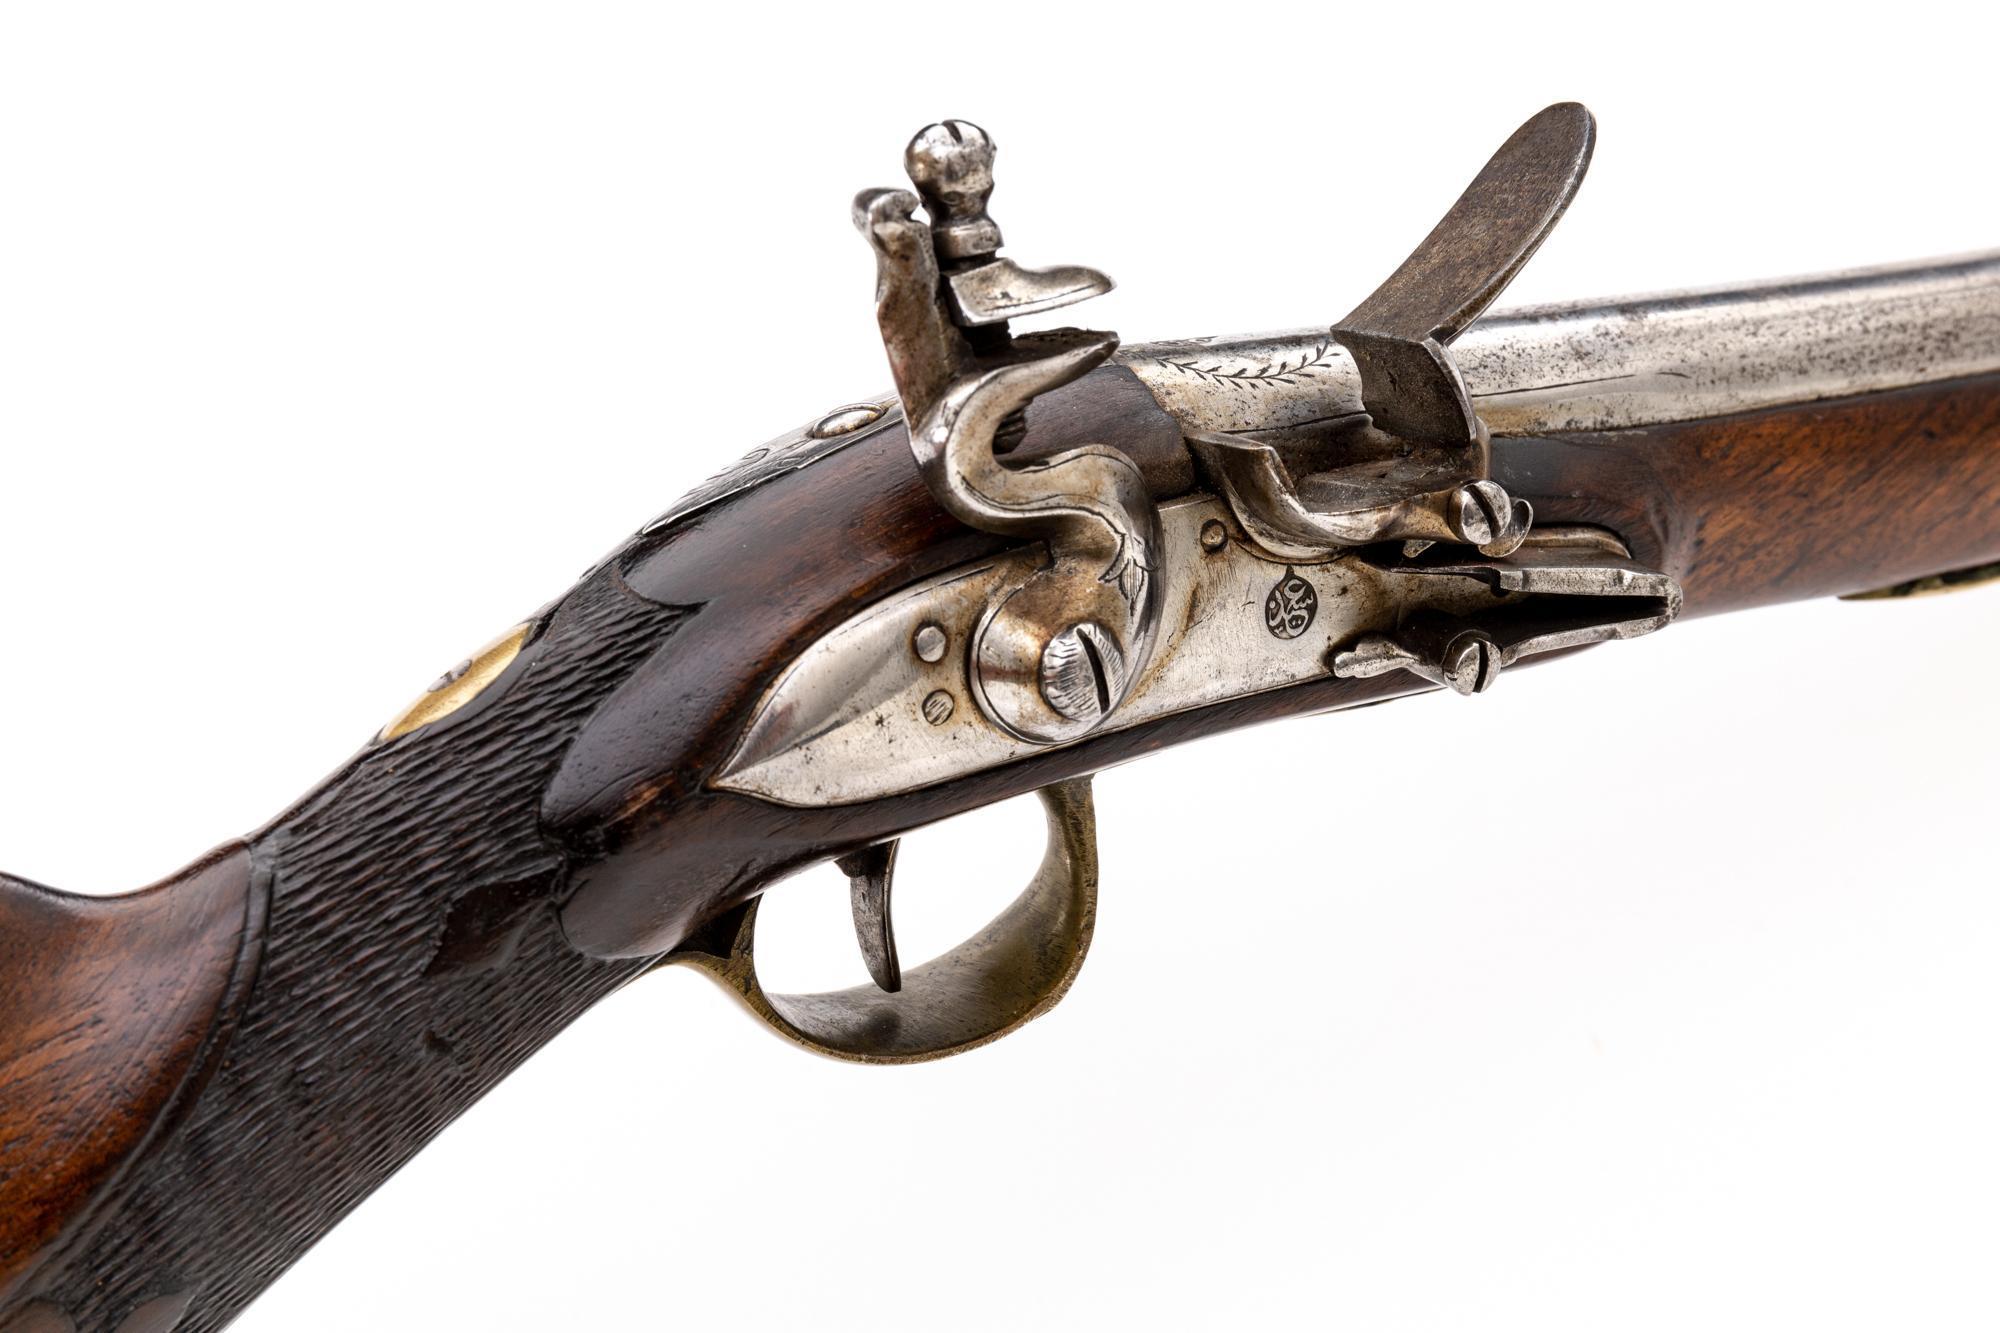 Rare Likely British-Made for the India Trade Antique Flintlock Boarding or Coach Blunderbuss Pistol